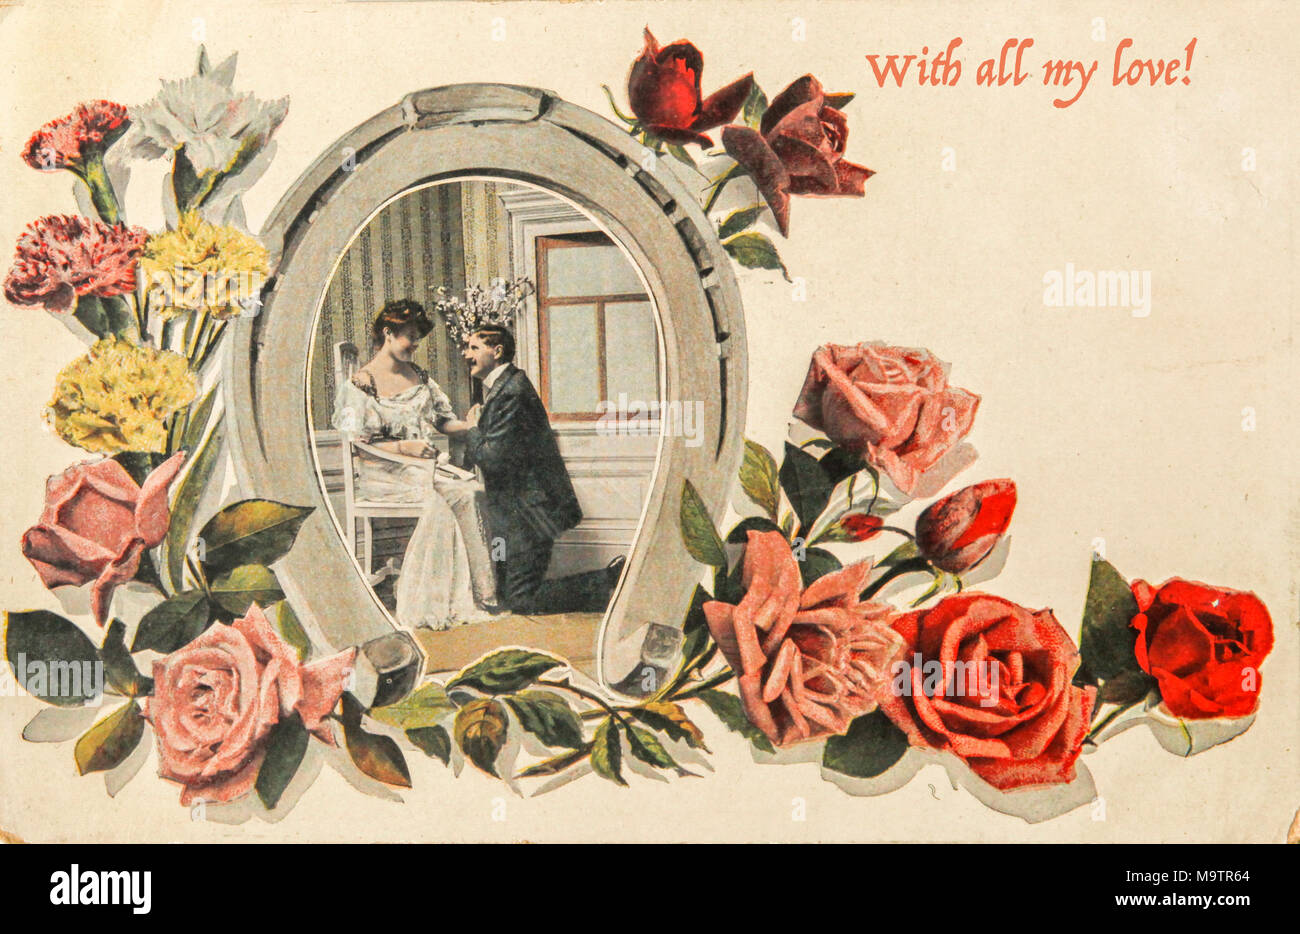 Vintage valentine card of 1915 with loving couple in horseshoe image with roses and text 'With all my love' Stock Photo